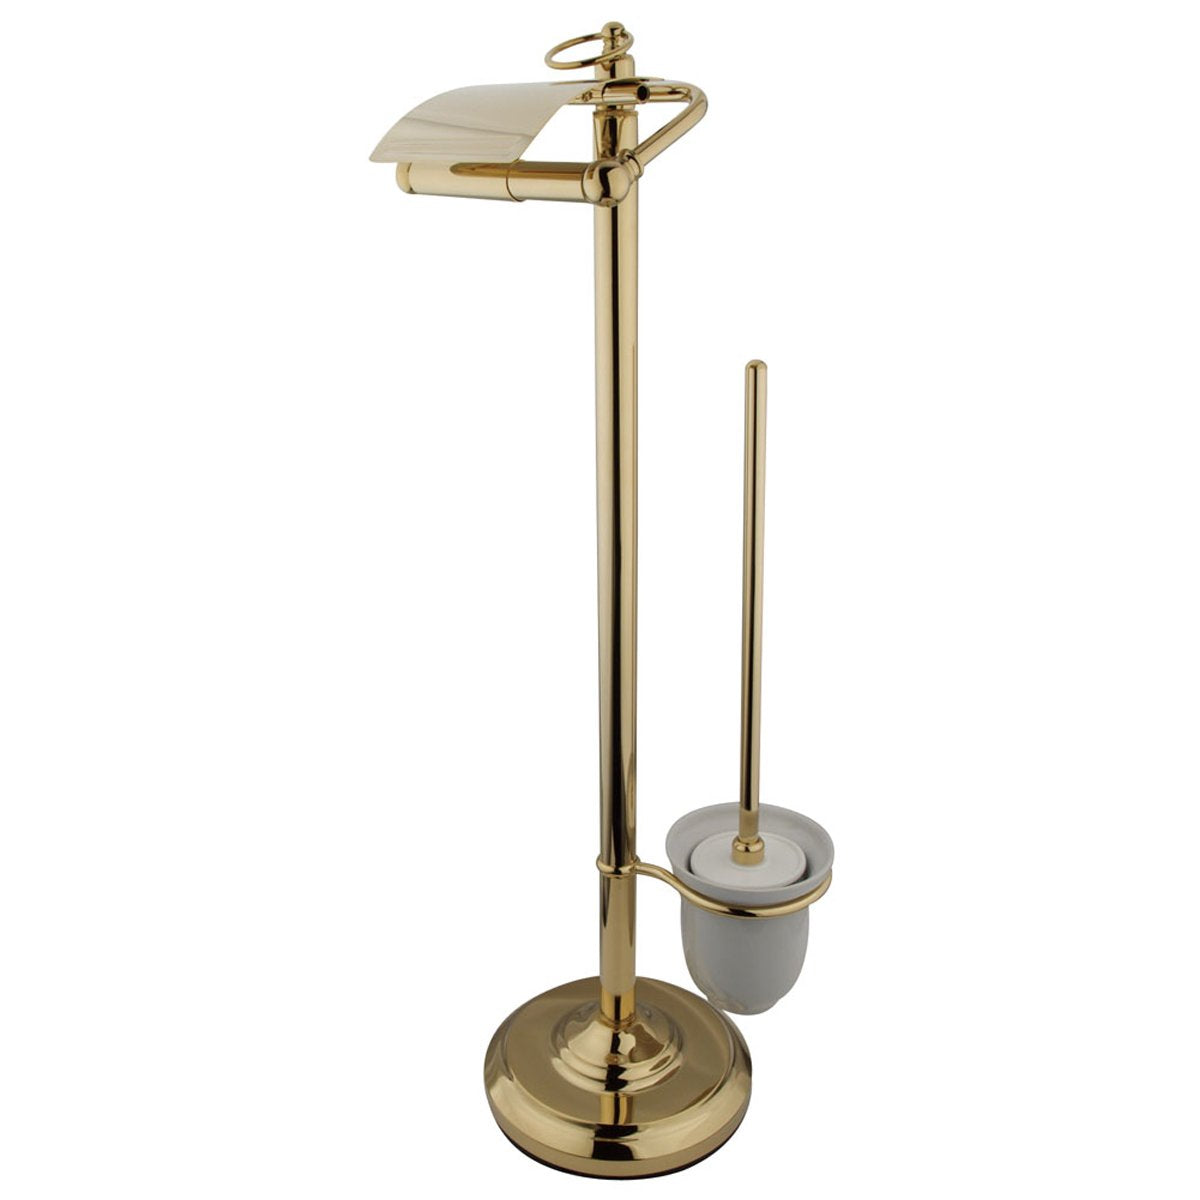 Kingston Brass Vintage Pedestal Toilet Paper and Brush Holder in Polished Brass-Bathroom Accessories-Free Shipping-Directsinks.